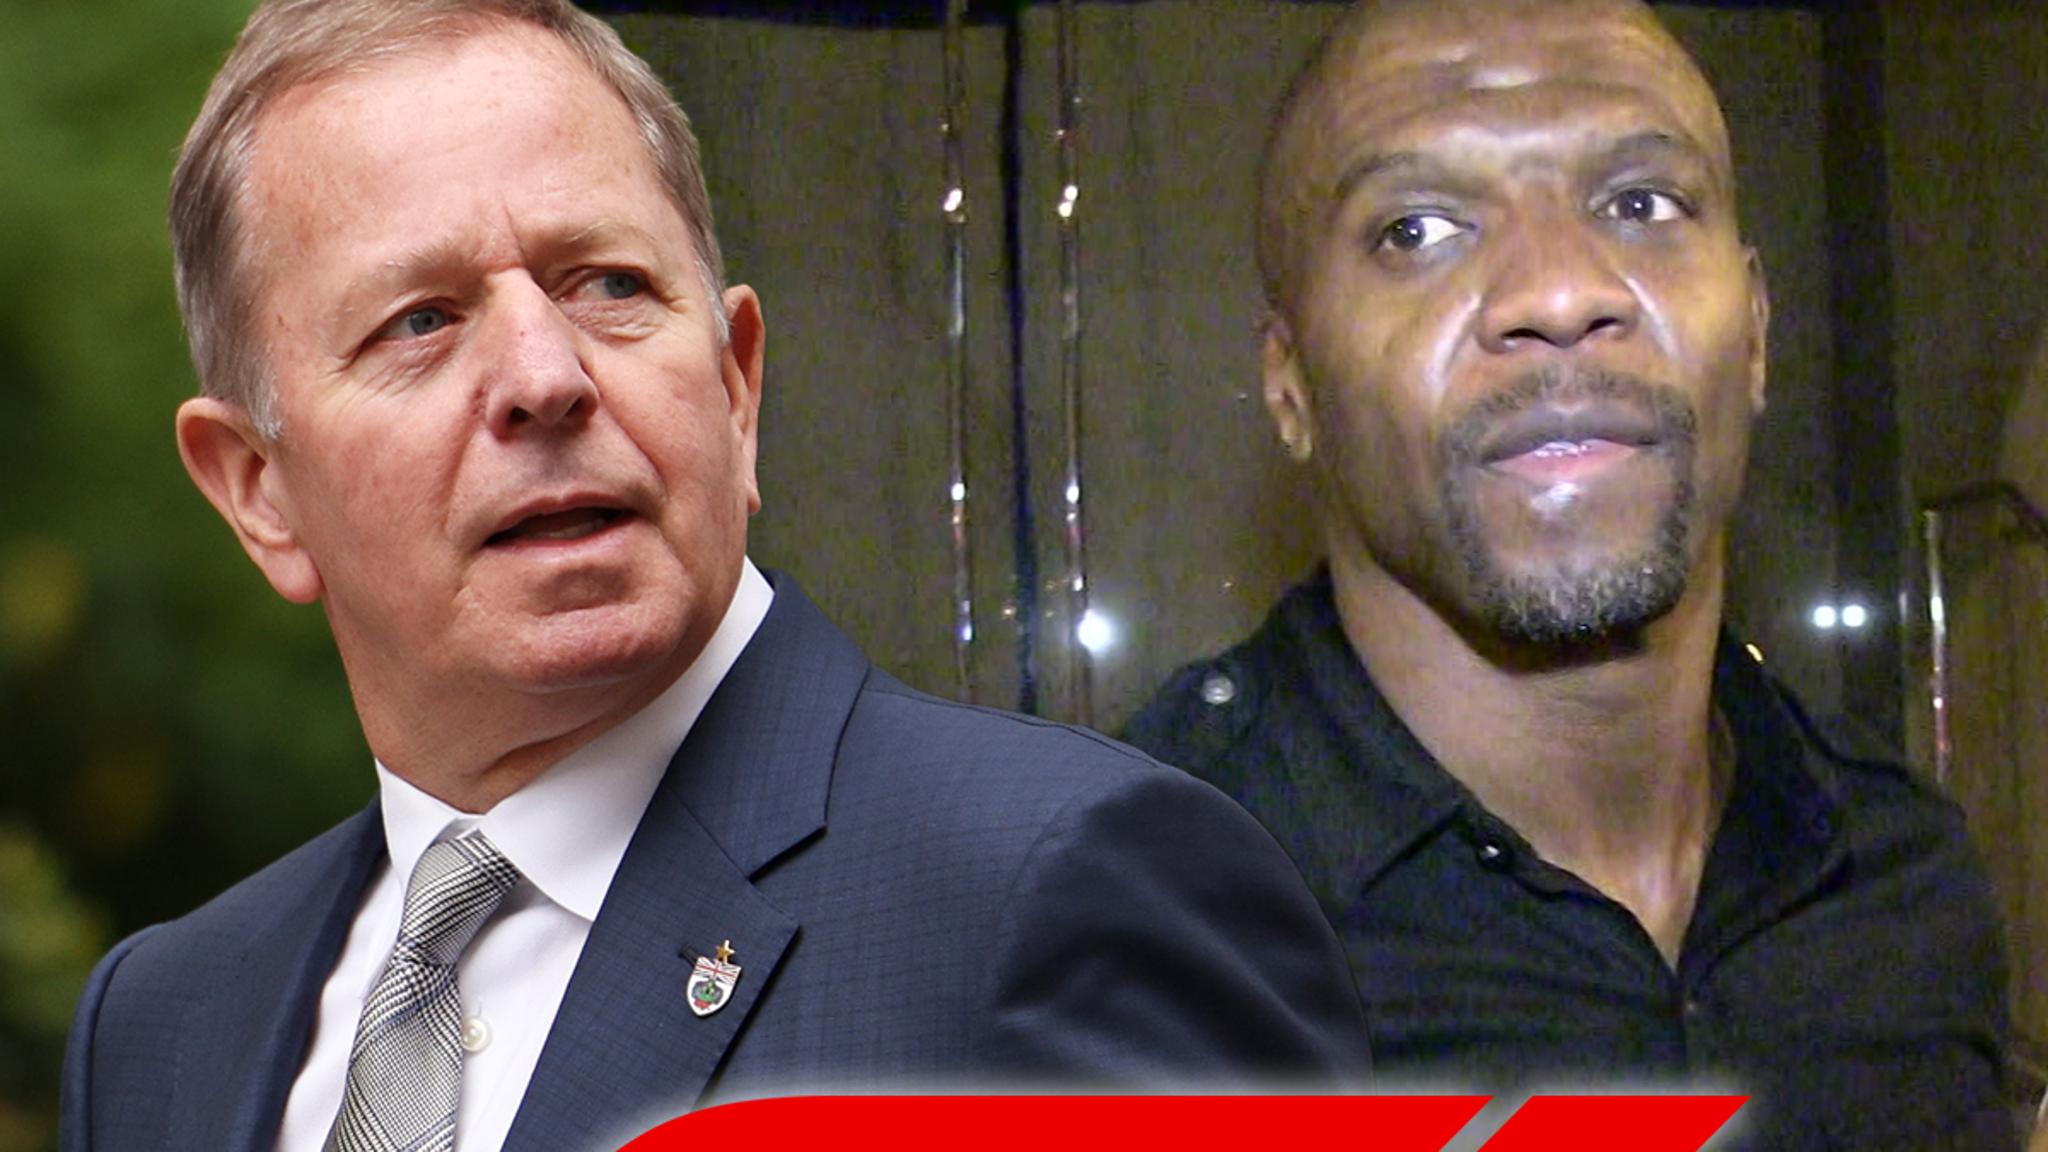 F1’s Martin Brundle Leaves Terry Crews Mid-Interview, Labeled Rude